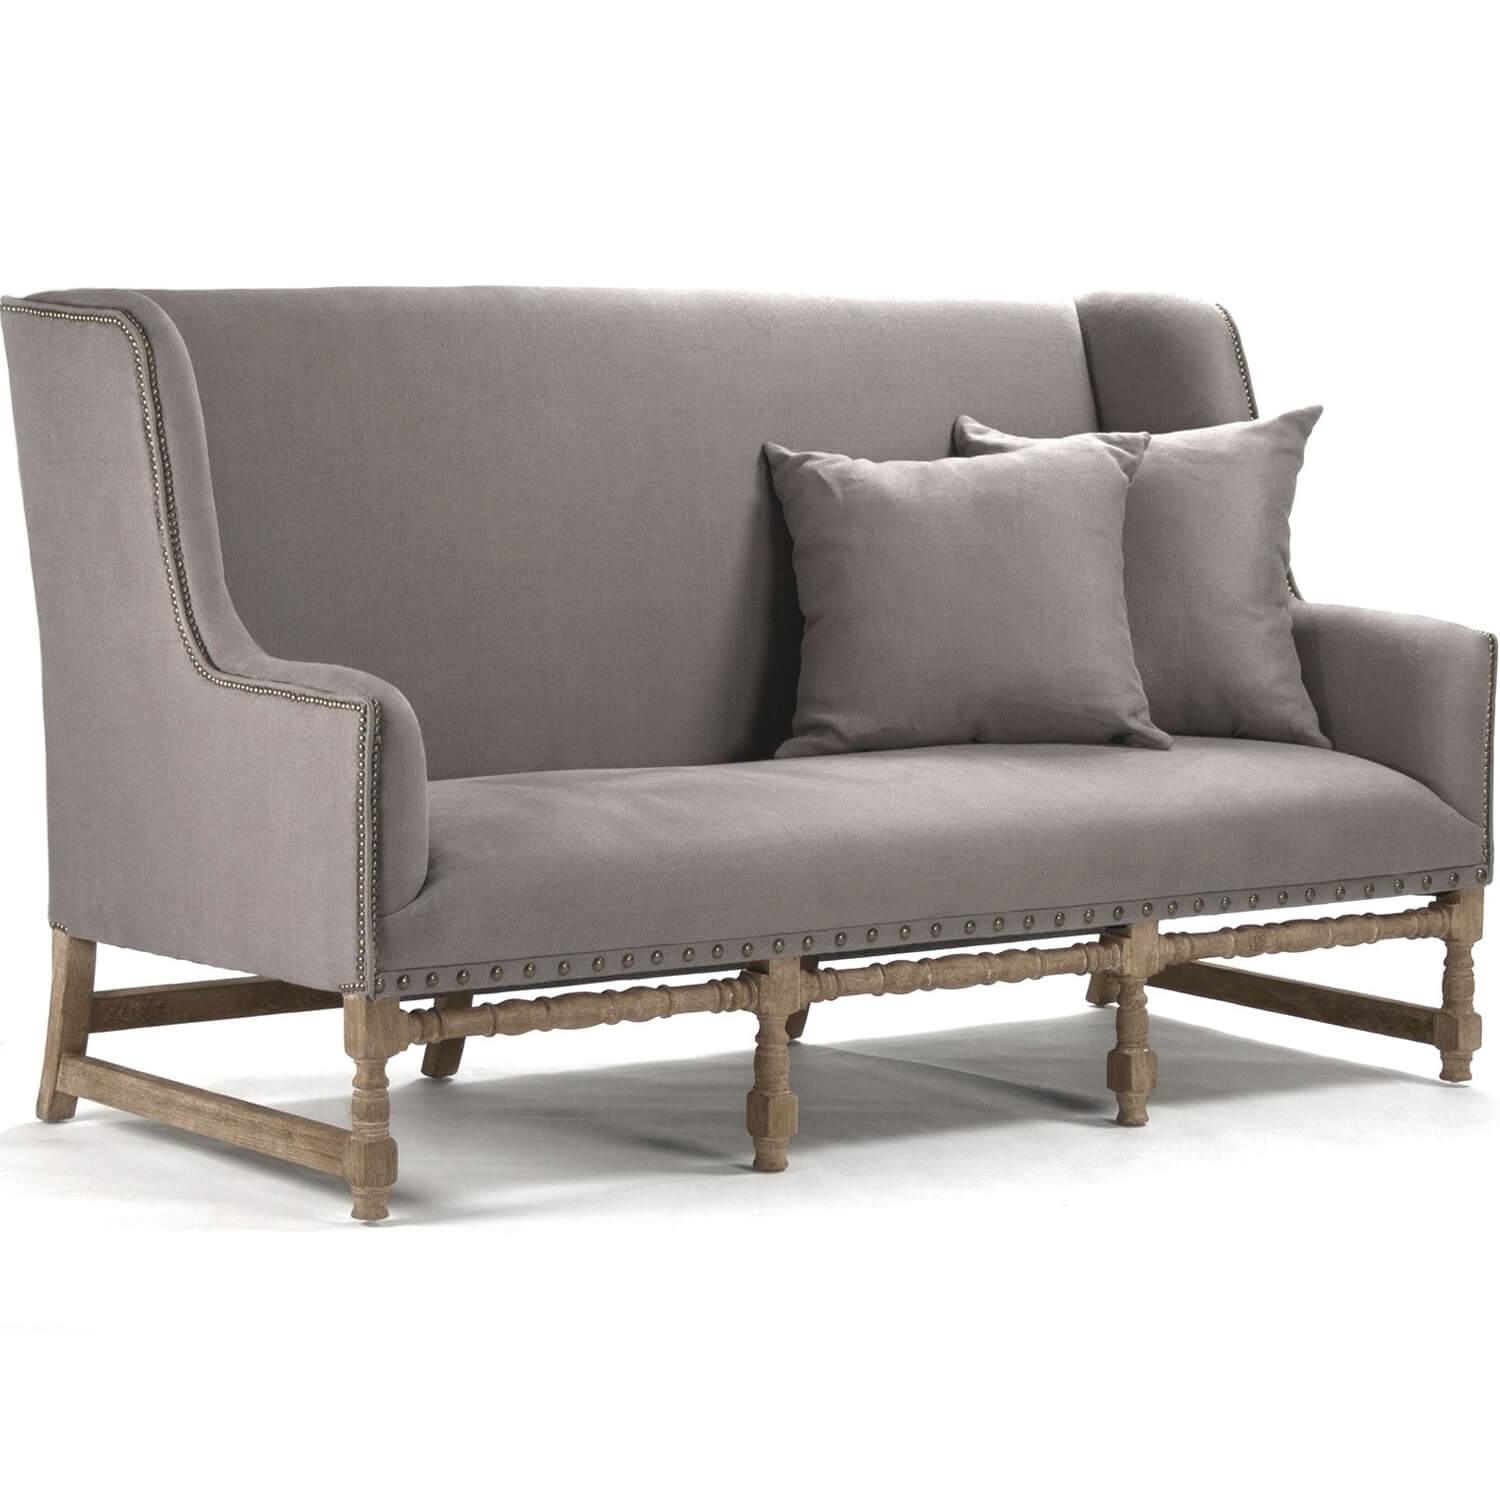 Smokey Gray Nail Studded Settee - Belle Escape